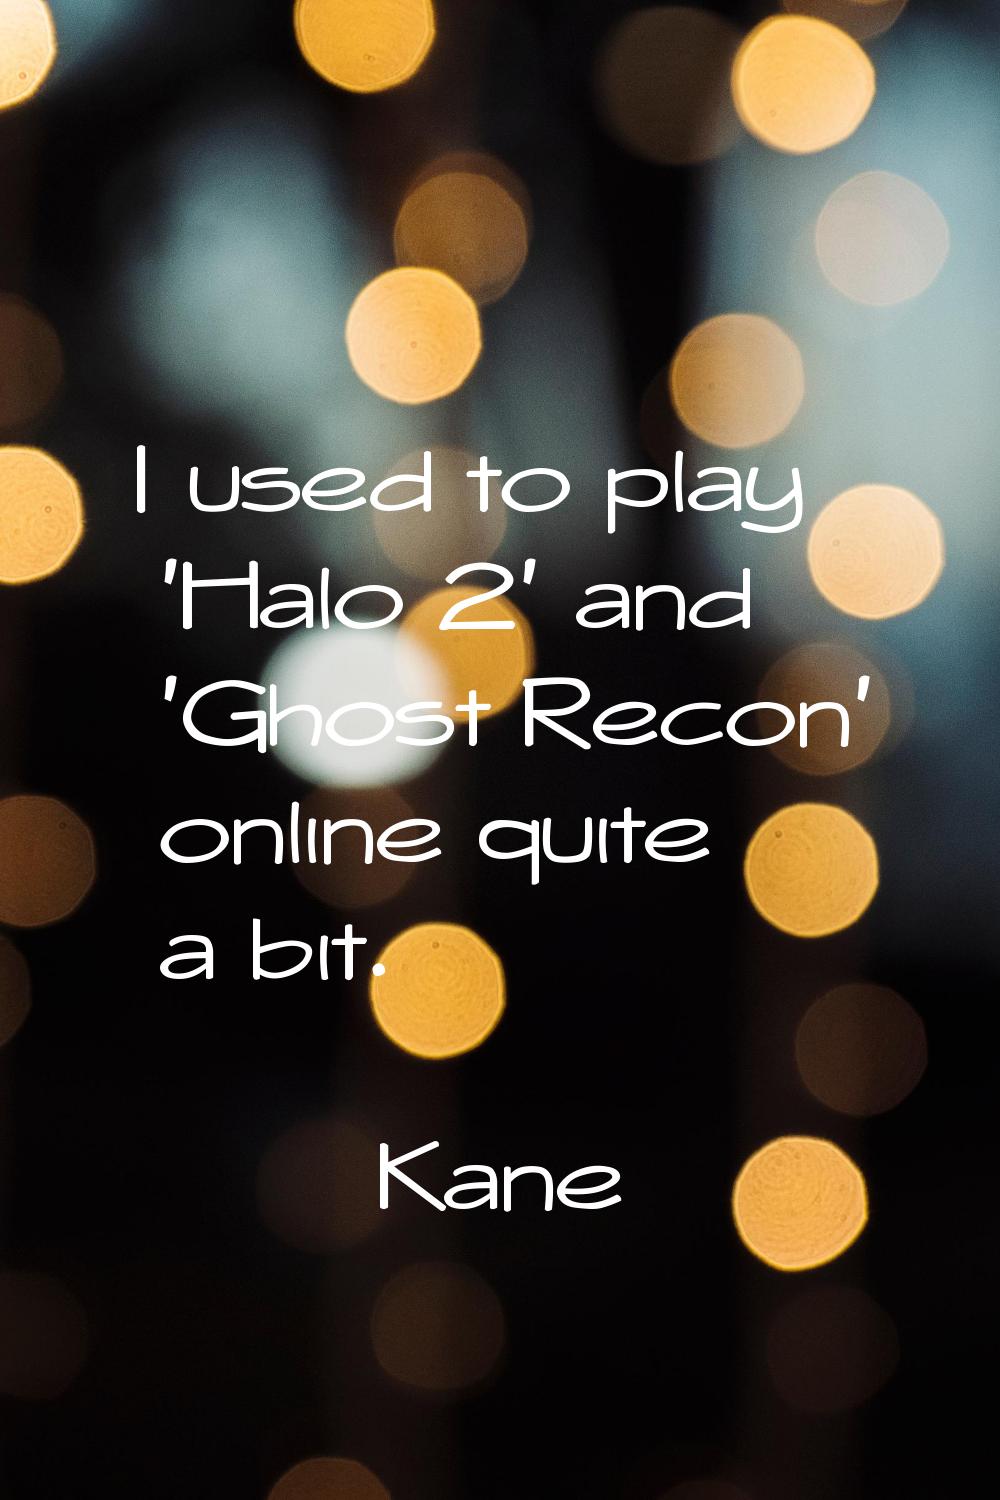 I used to play 'Halo 2' and 'Ghost Recon' online quite a bit.